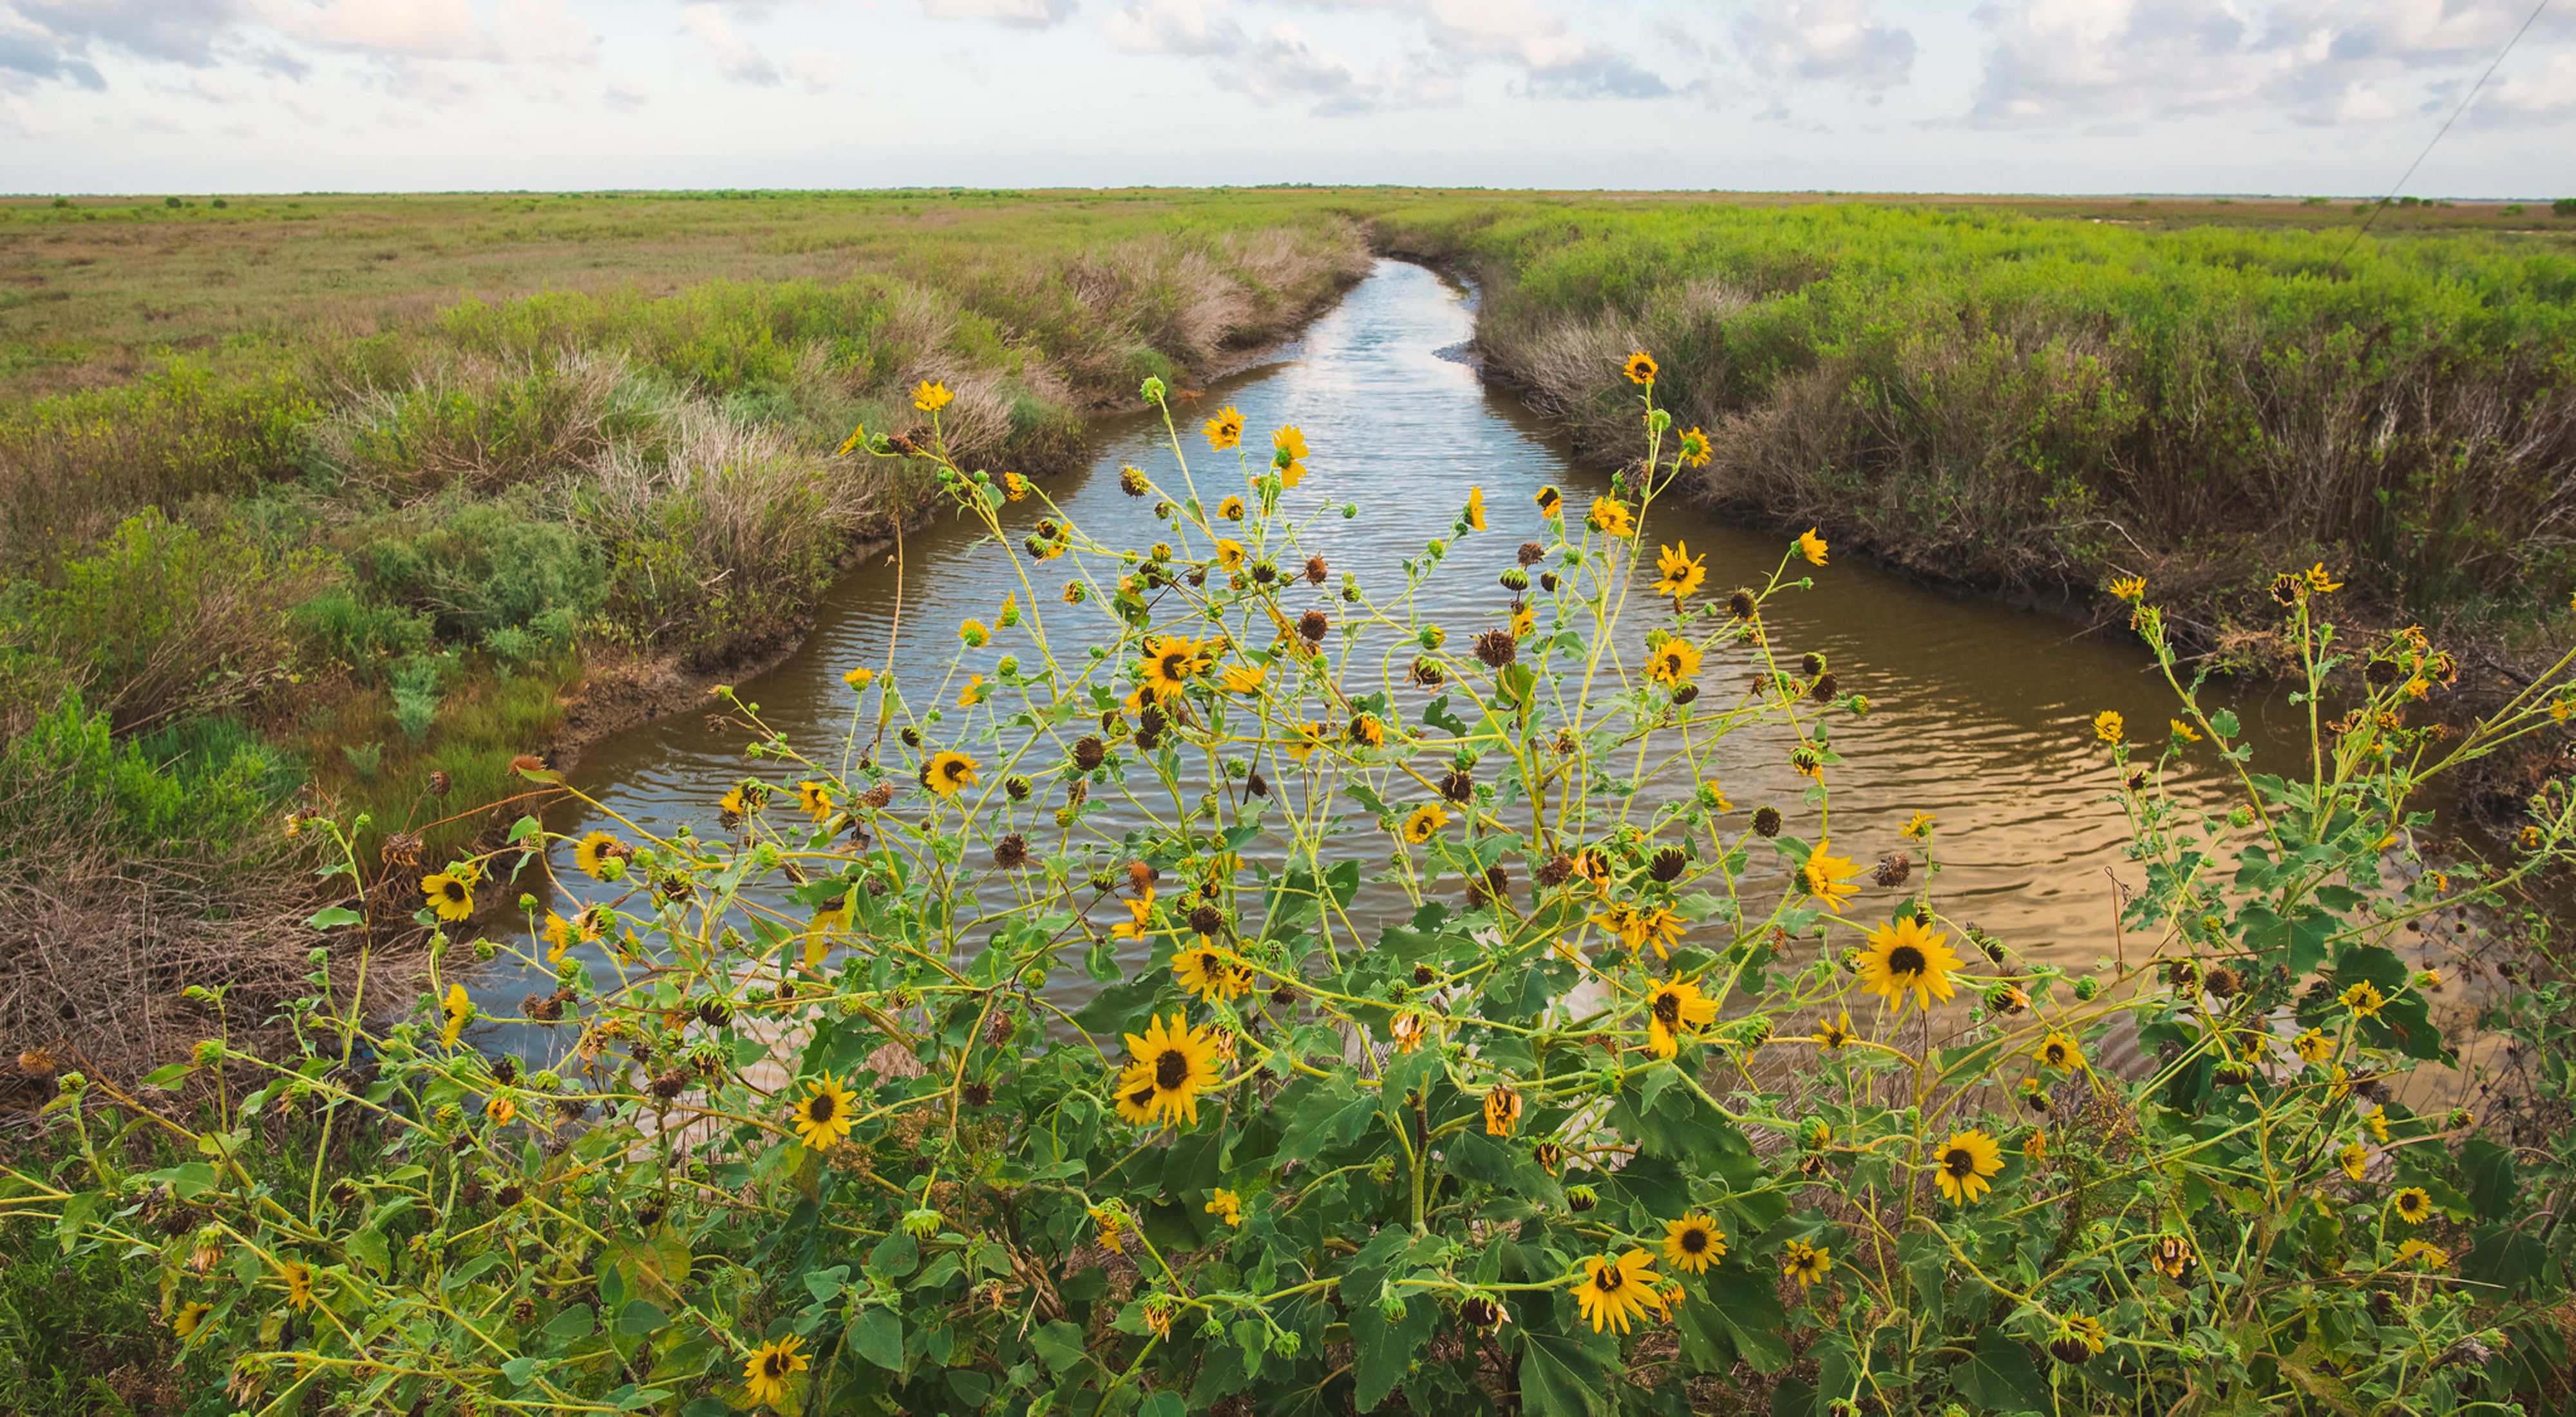 A cluster of yellow sunflowers bloom near a thin river lined with green grass.